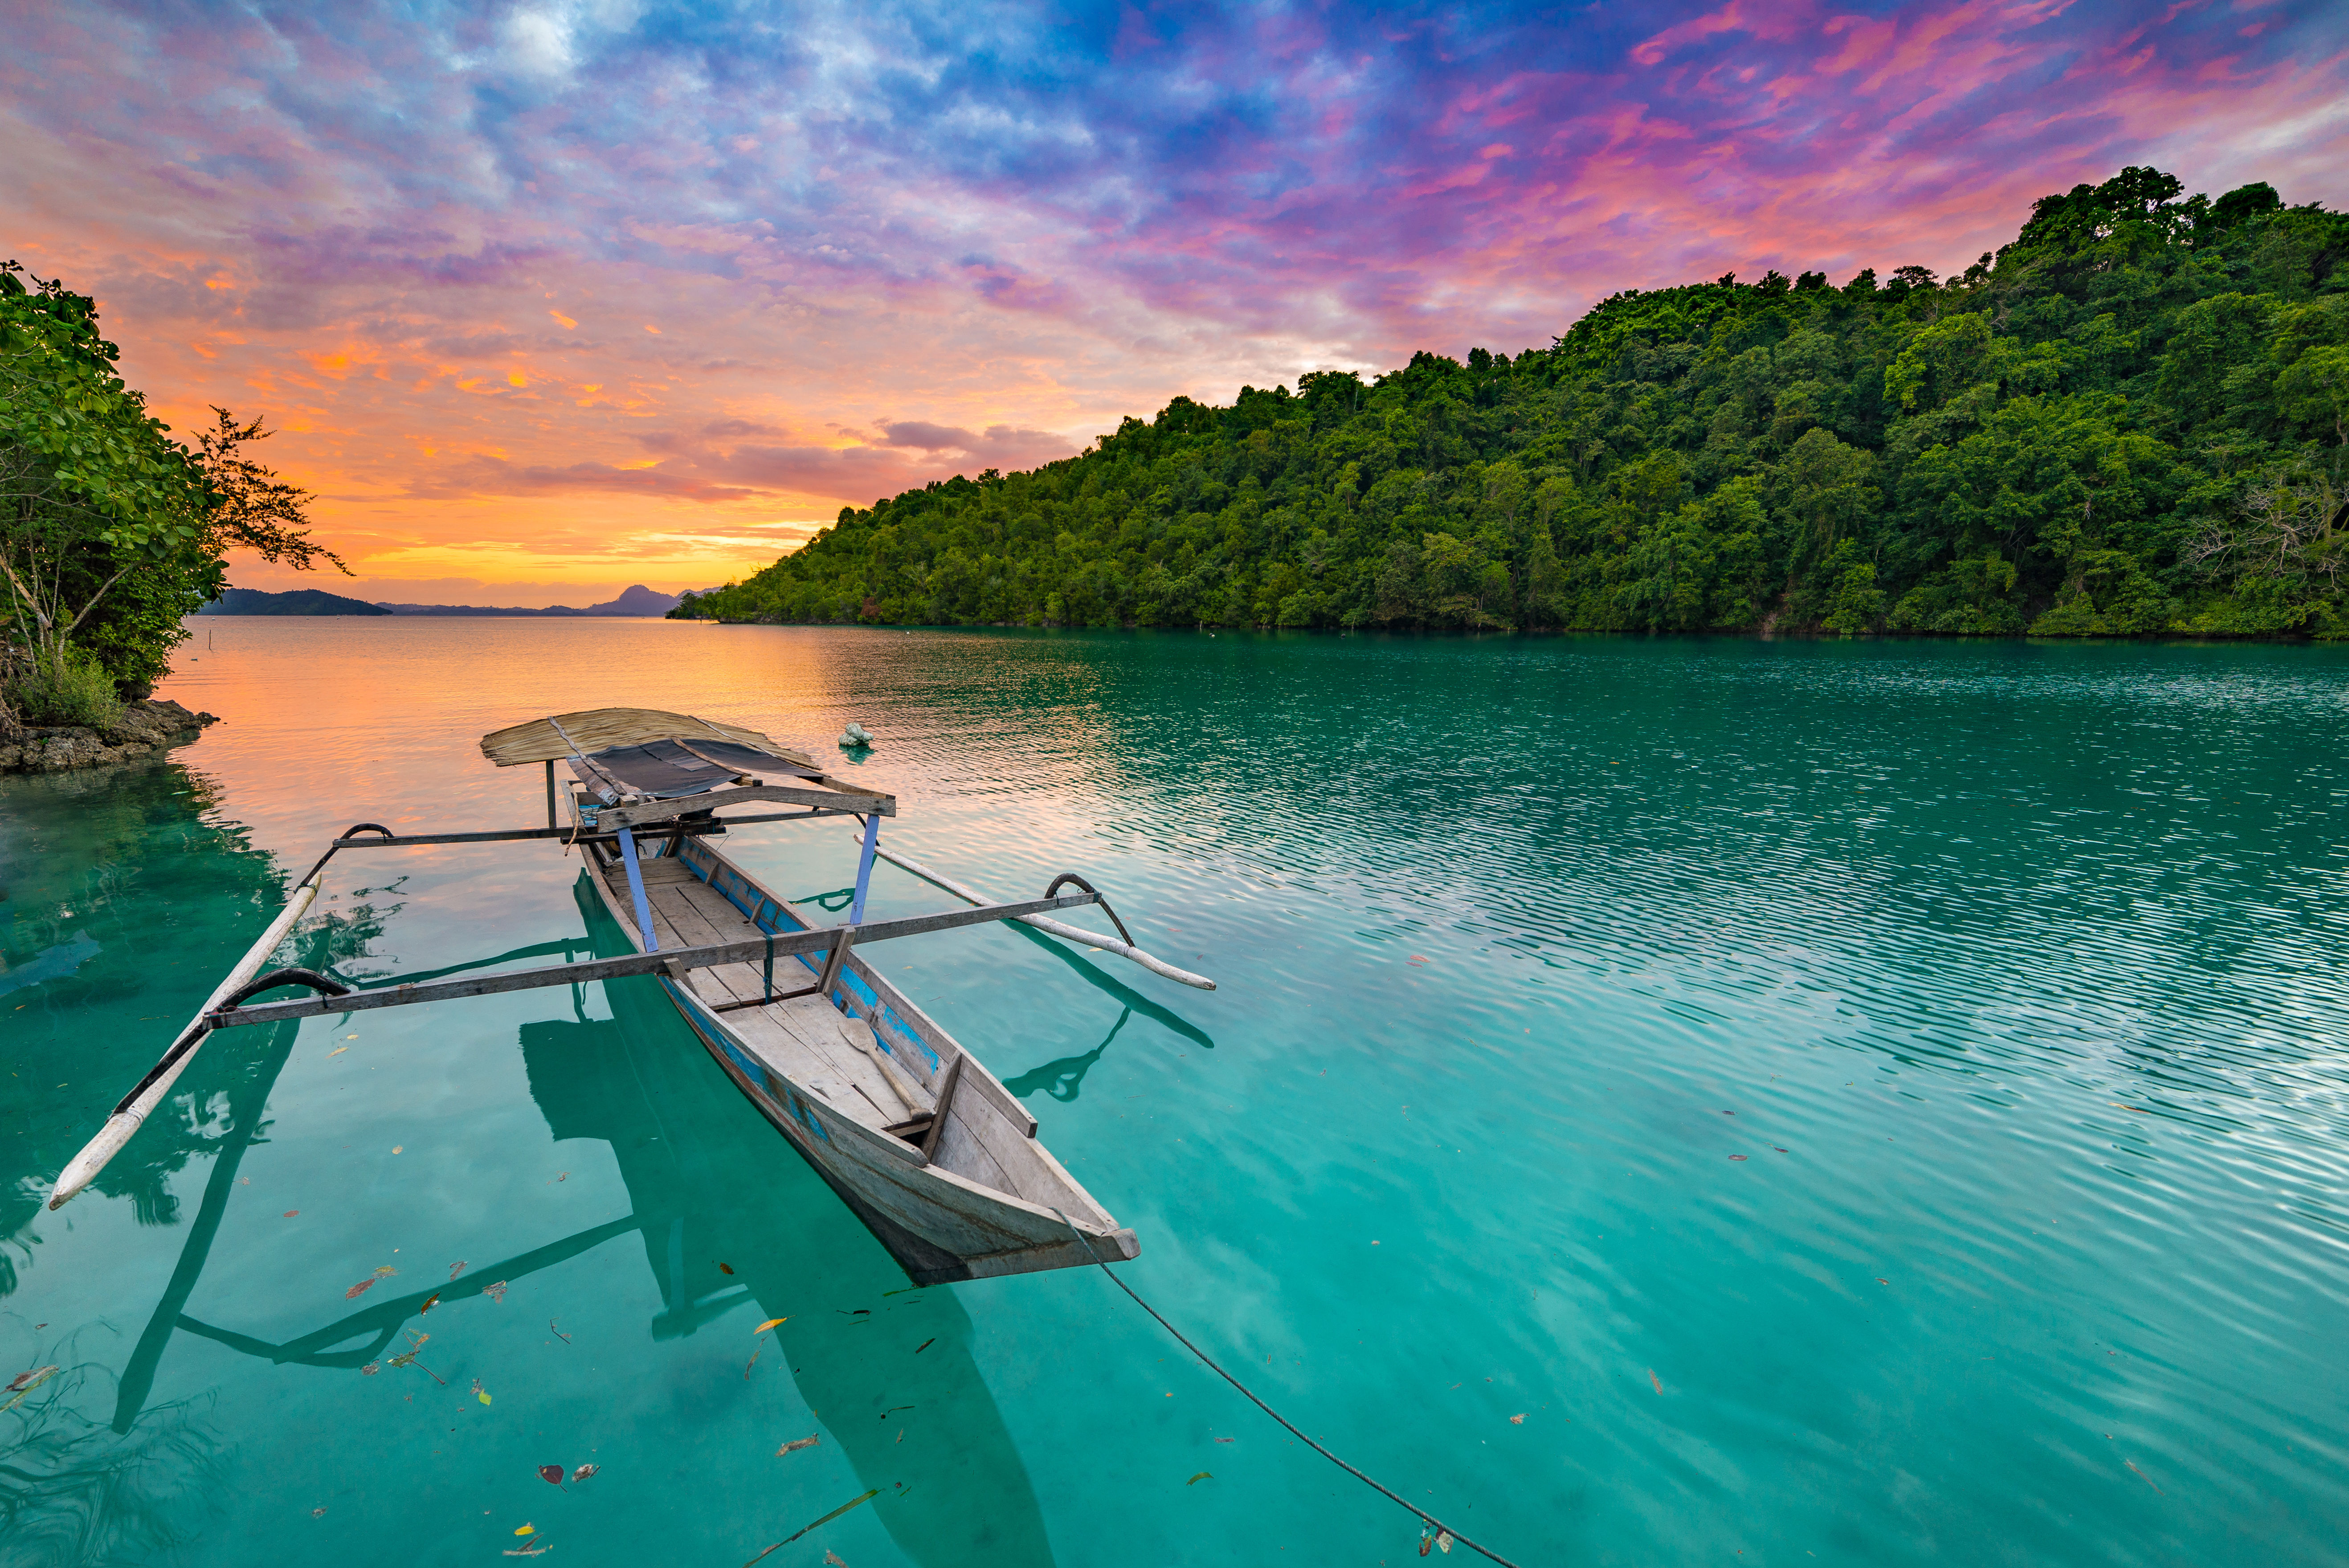 Traditional Indonesian boat floating on blue green lagoon in the Togean Islands, Sulawesi at sunset. 